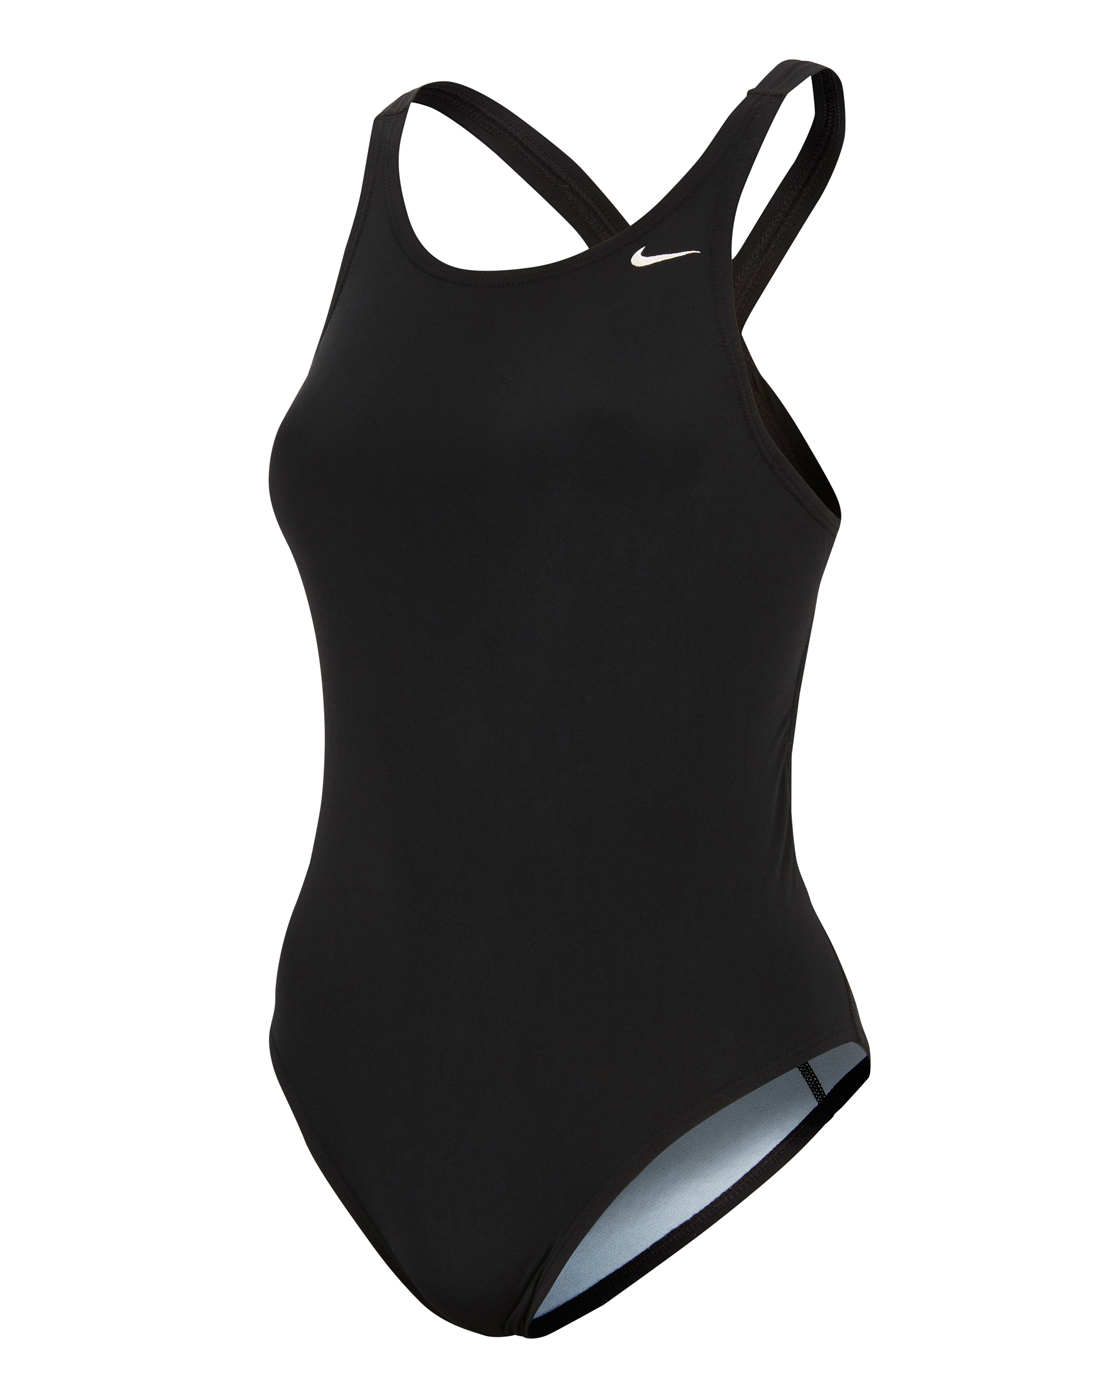 Women’s Nike Solid Black Swimsuit | Life Style Sports